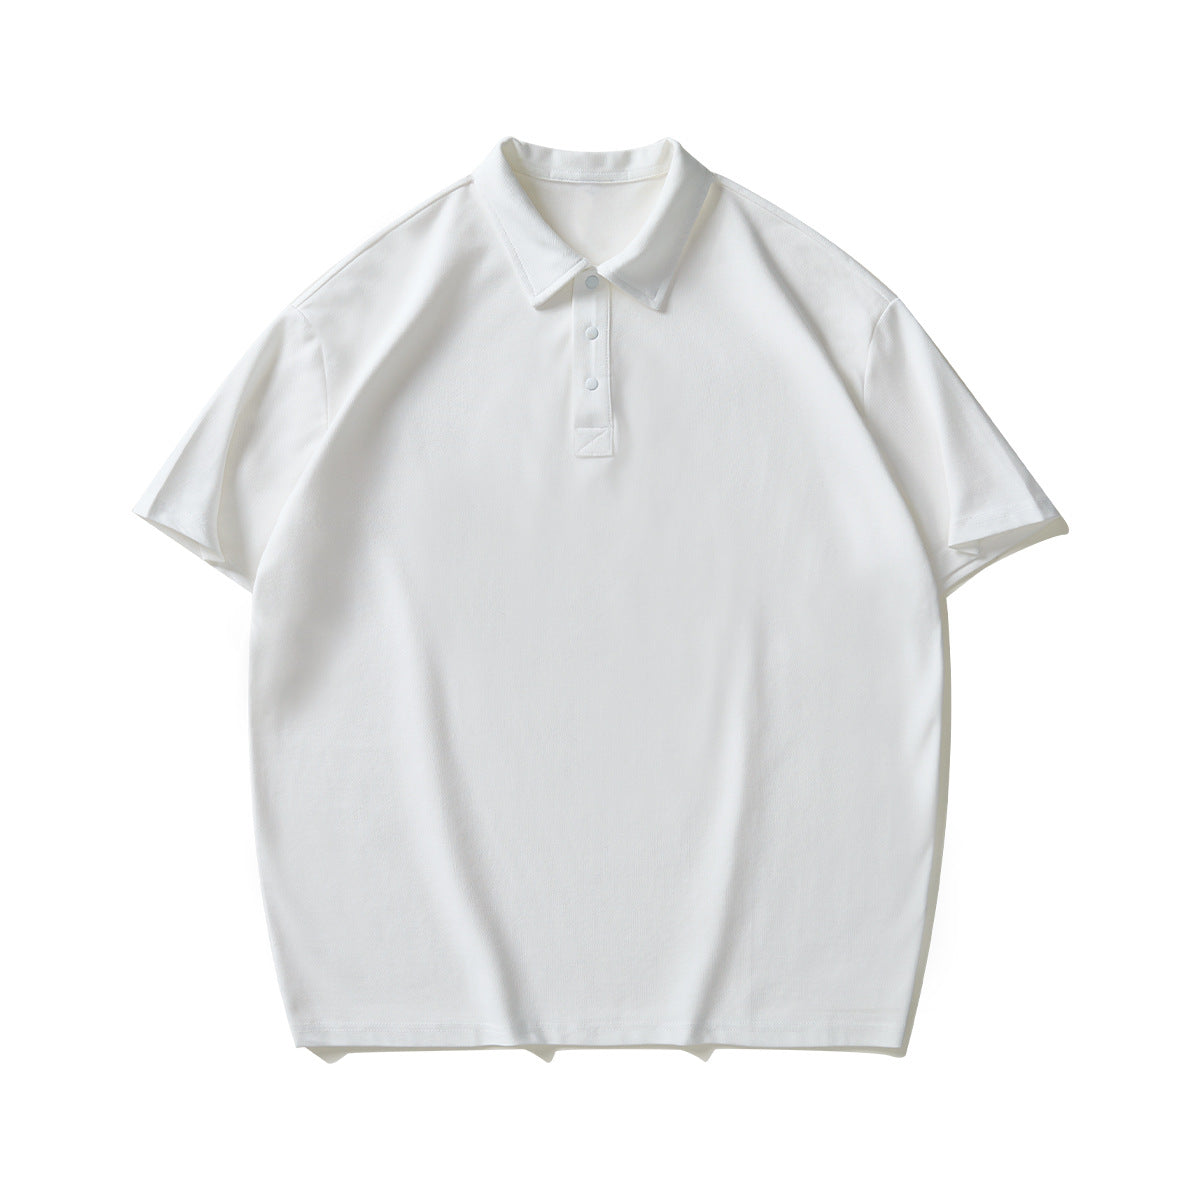 210g Pearl Cotton Basic Solid Color Polo Shirt